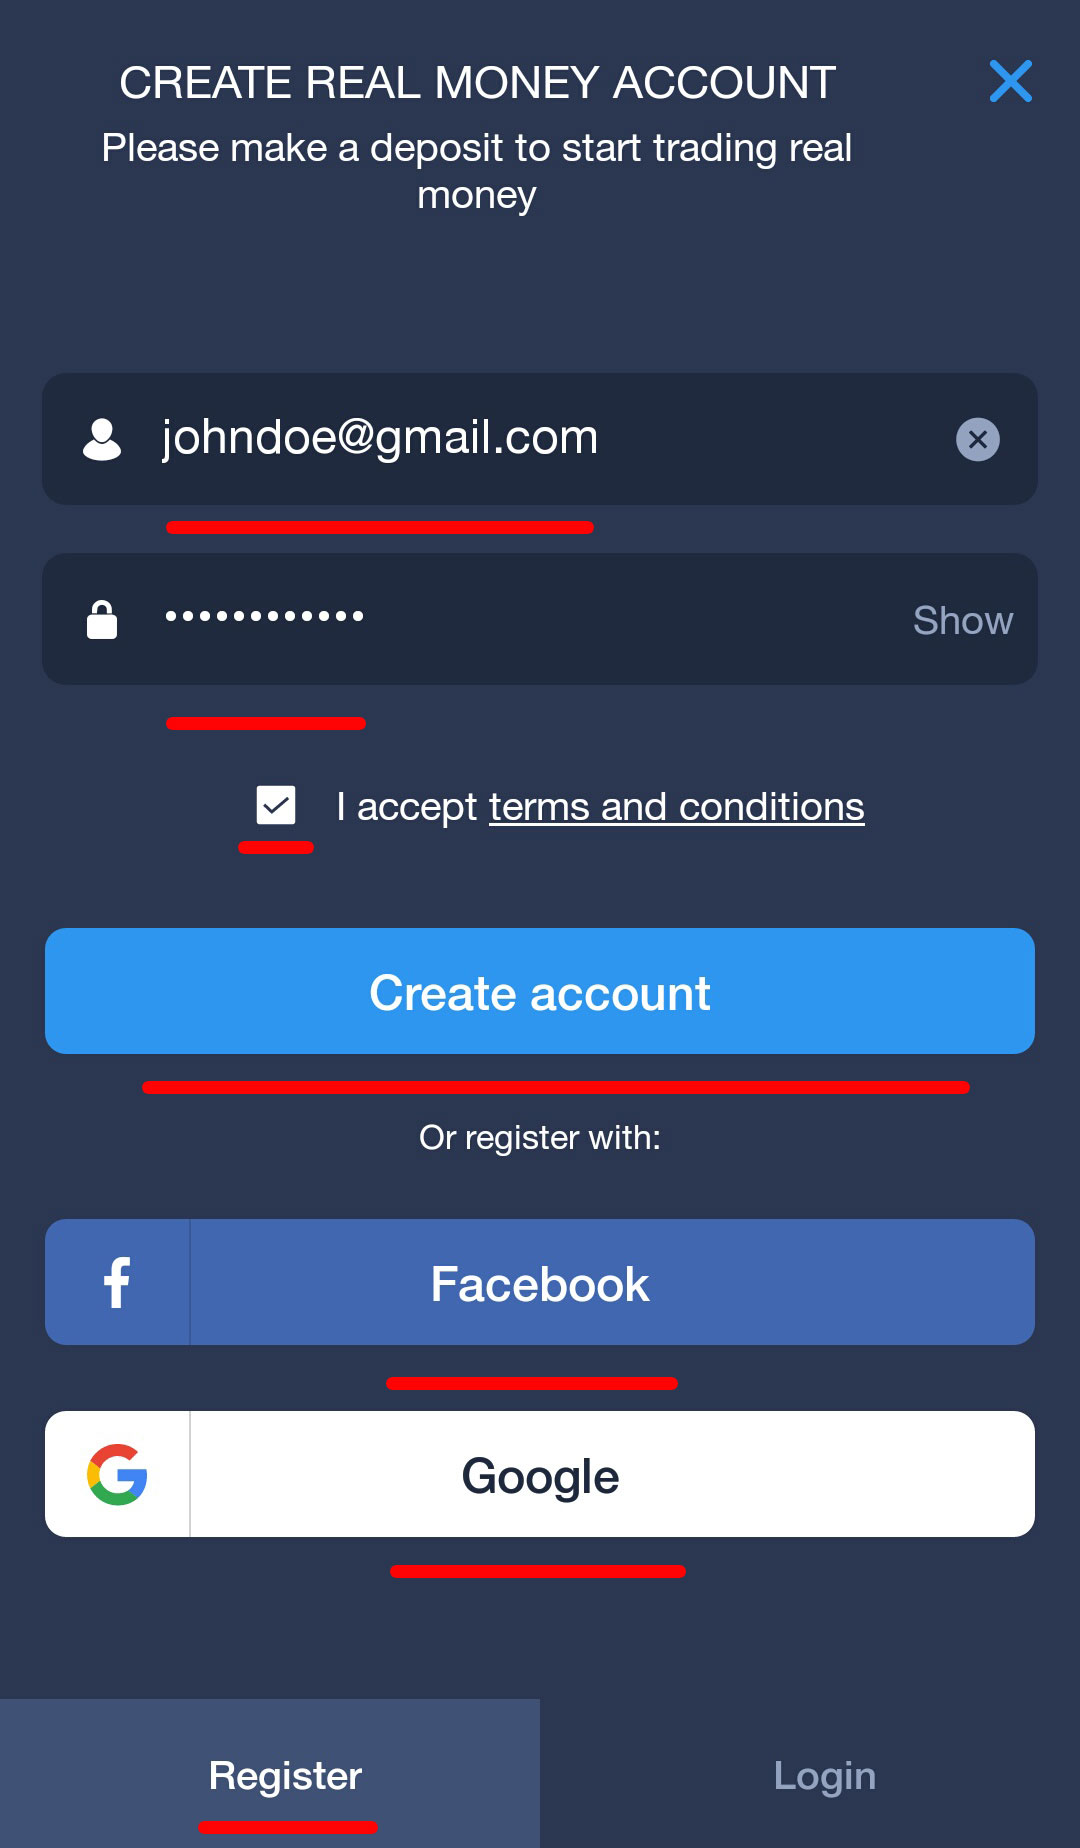 ExpertOption - Register an account in the android app